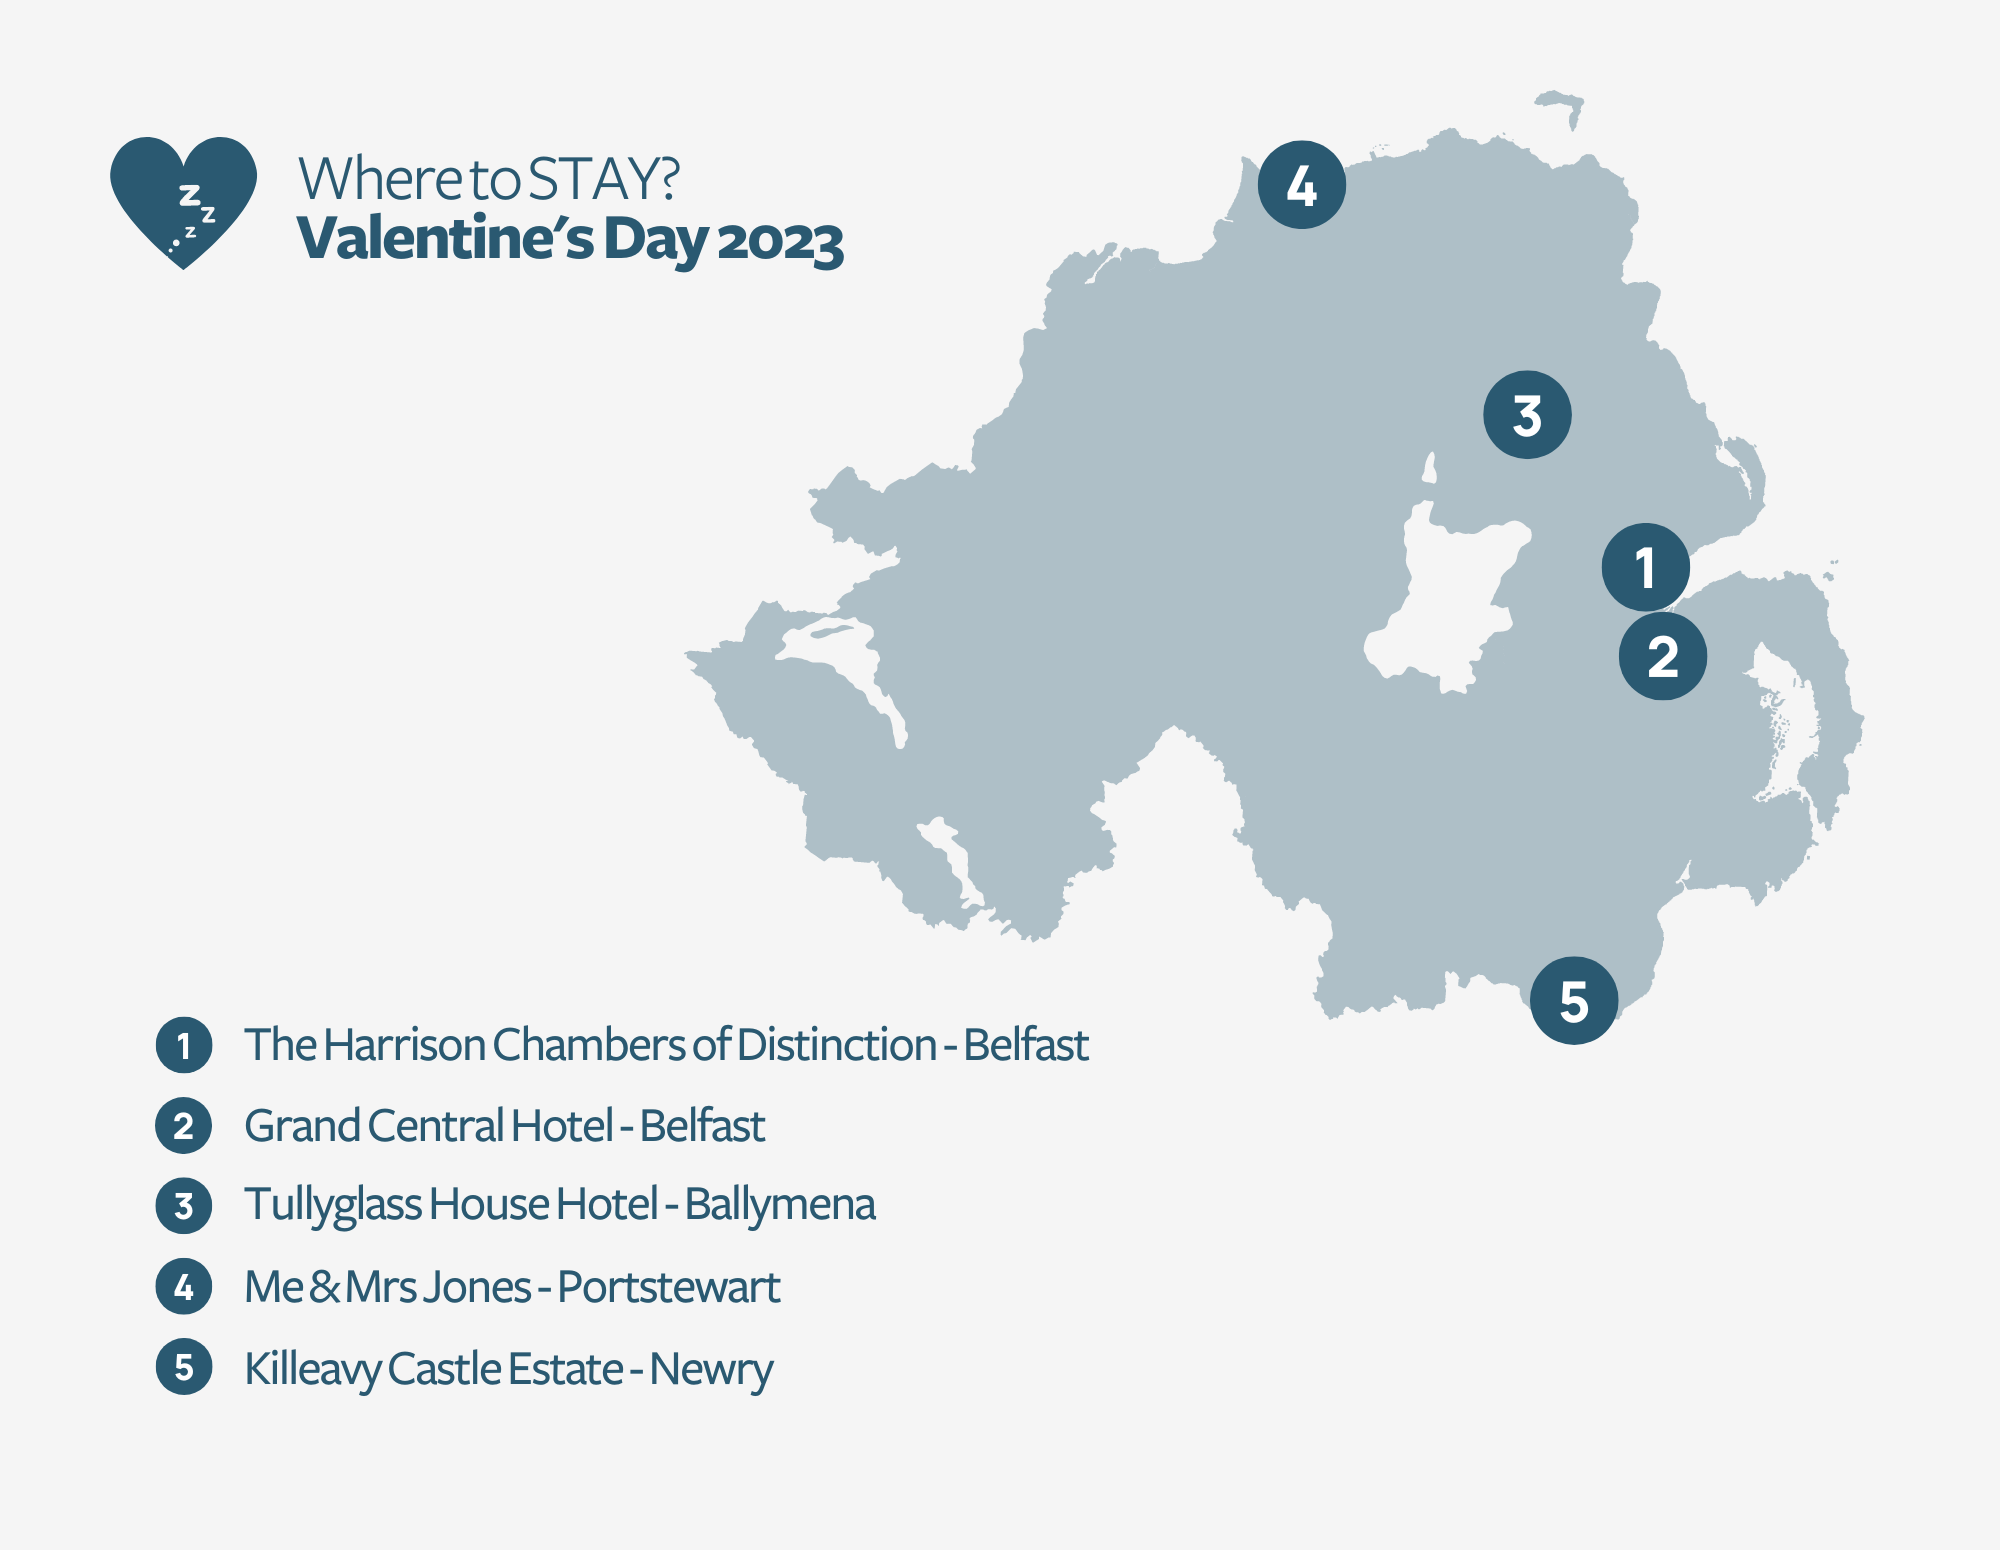 Where to stay in Northern Ireland for Valentines Day 2023